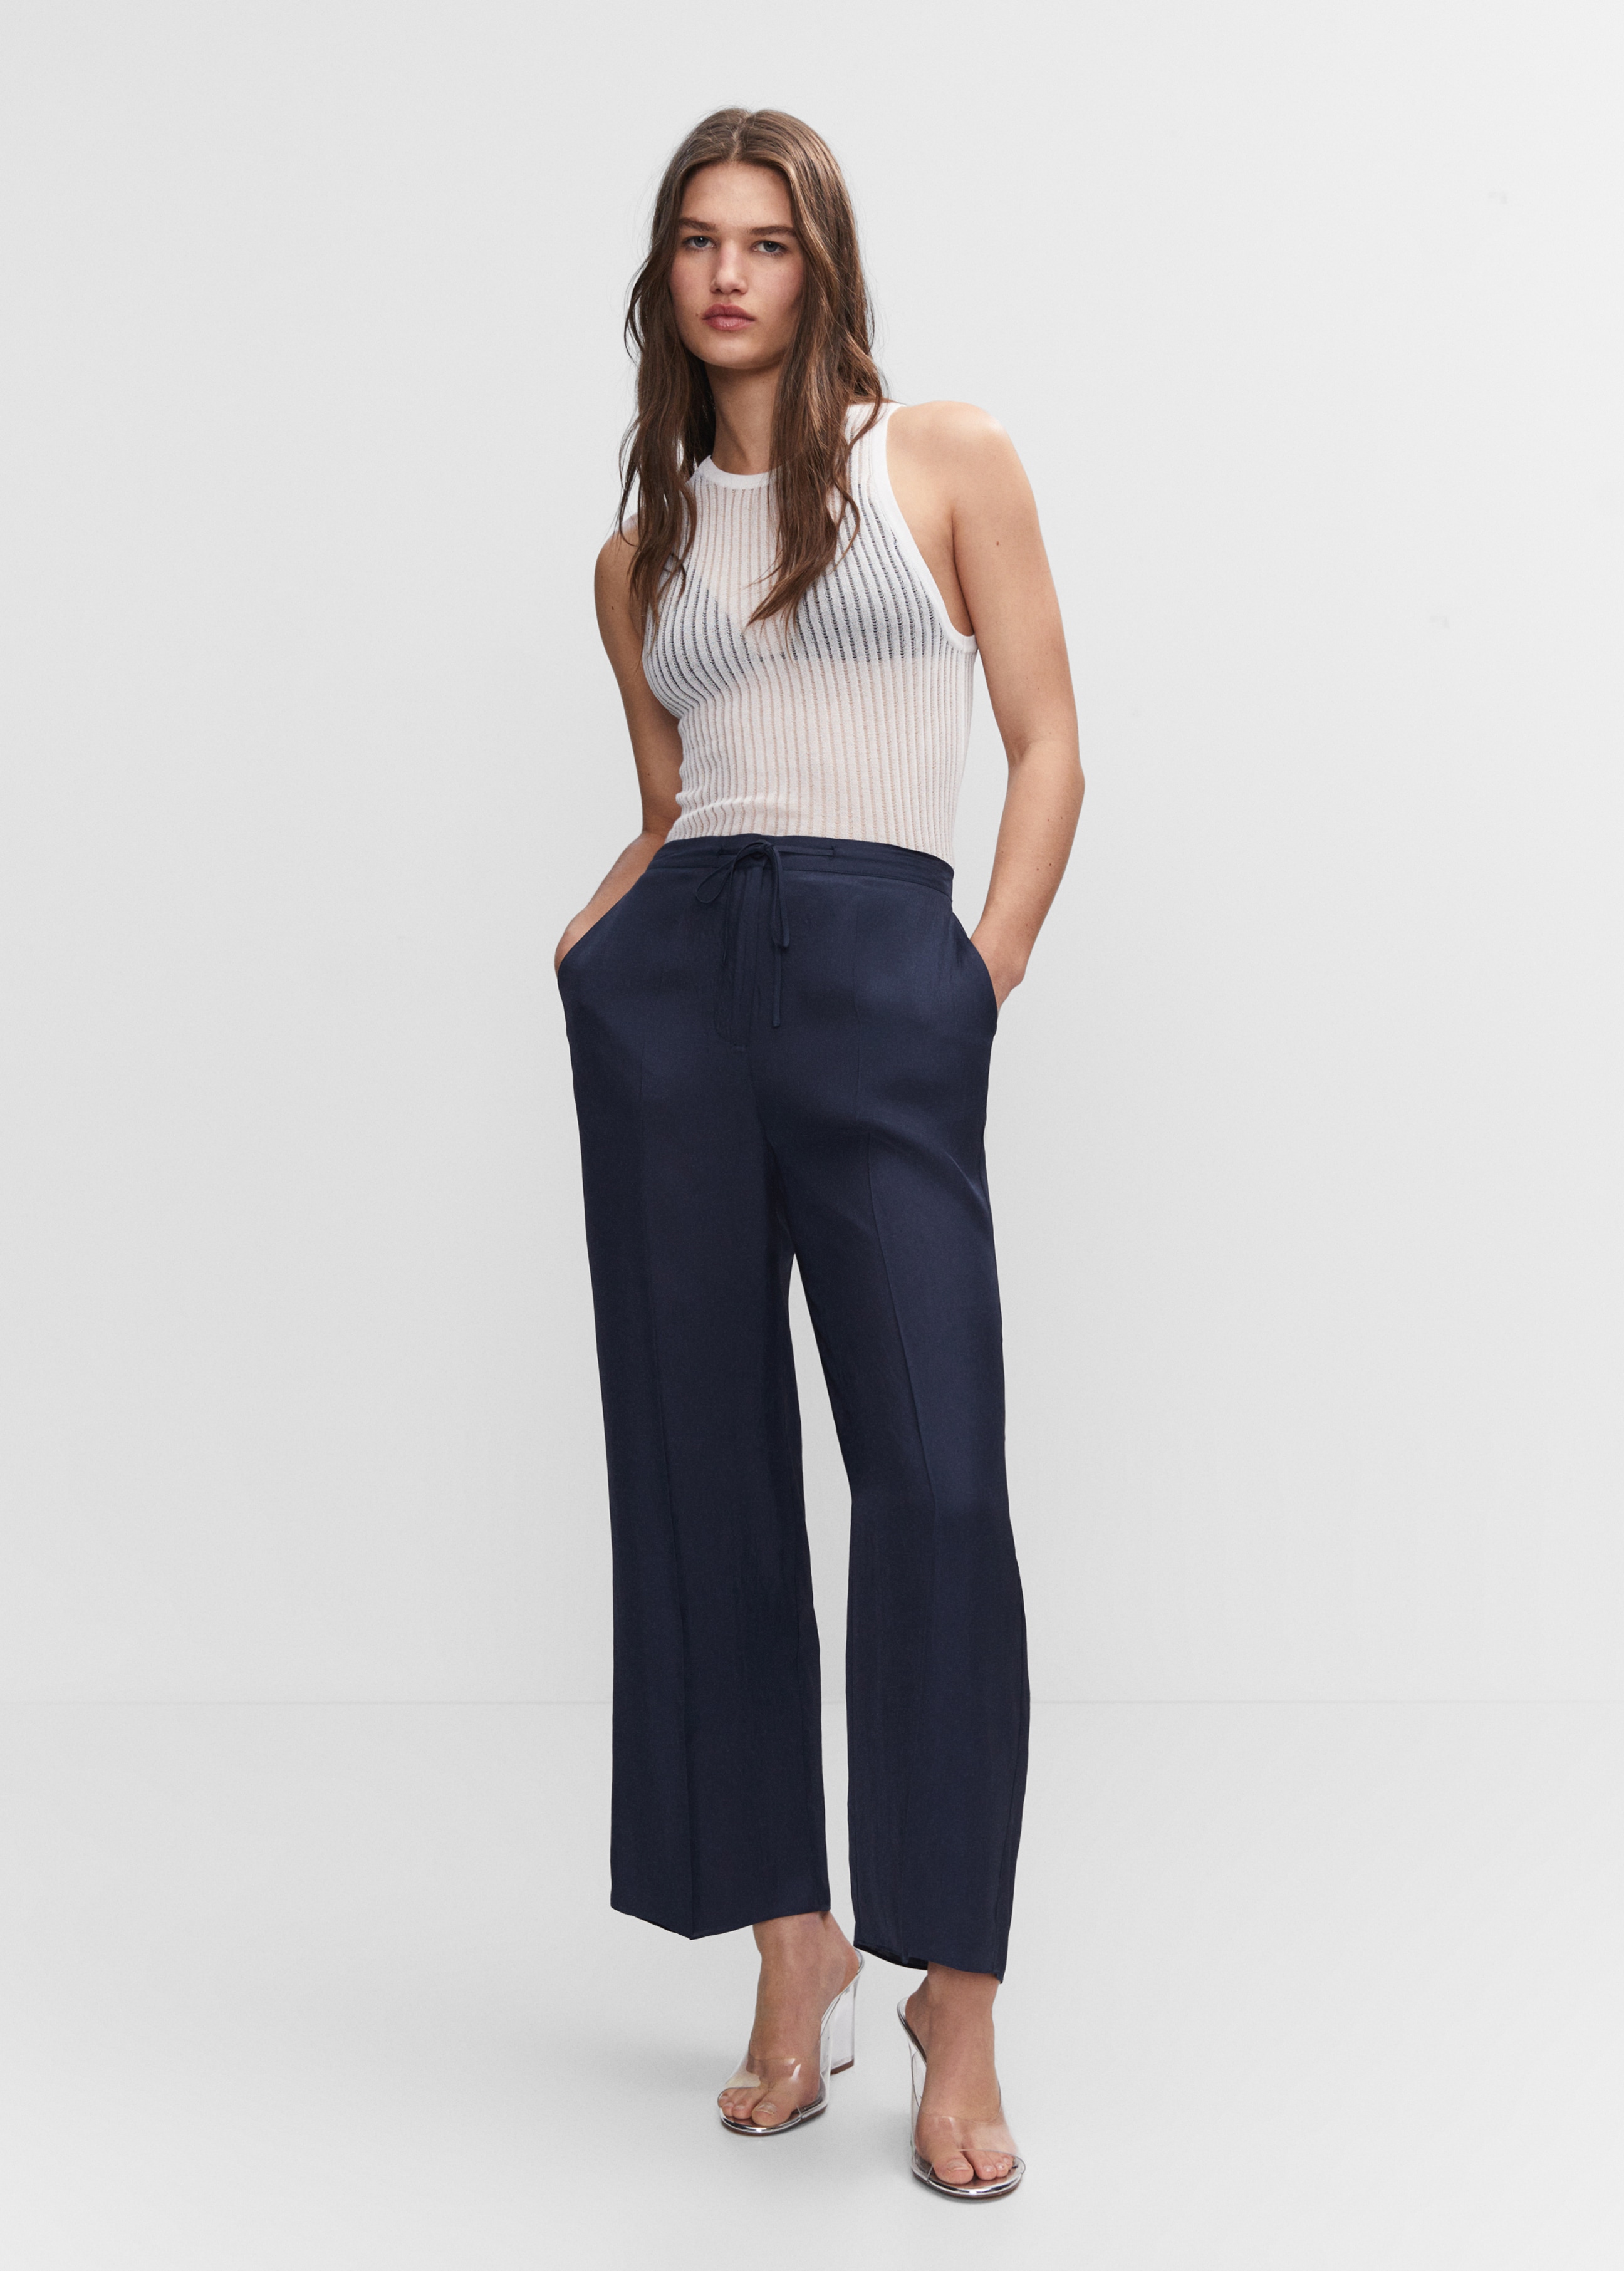 Bow culottes trousers - General plane